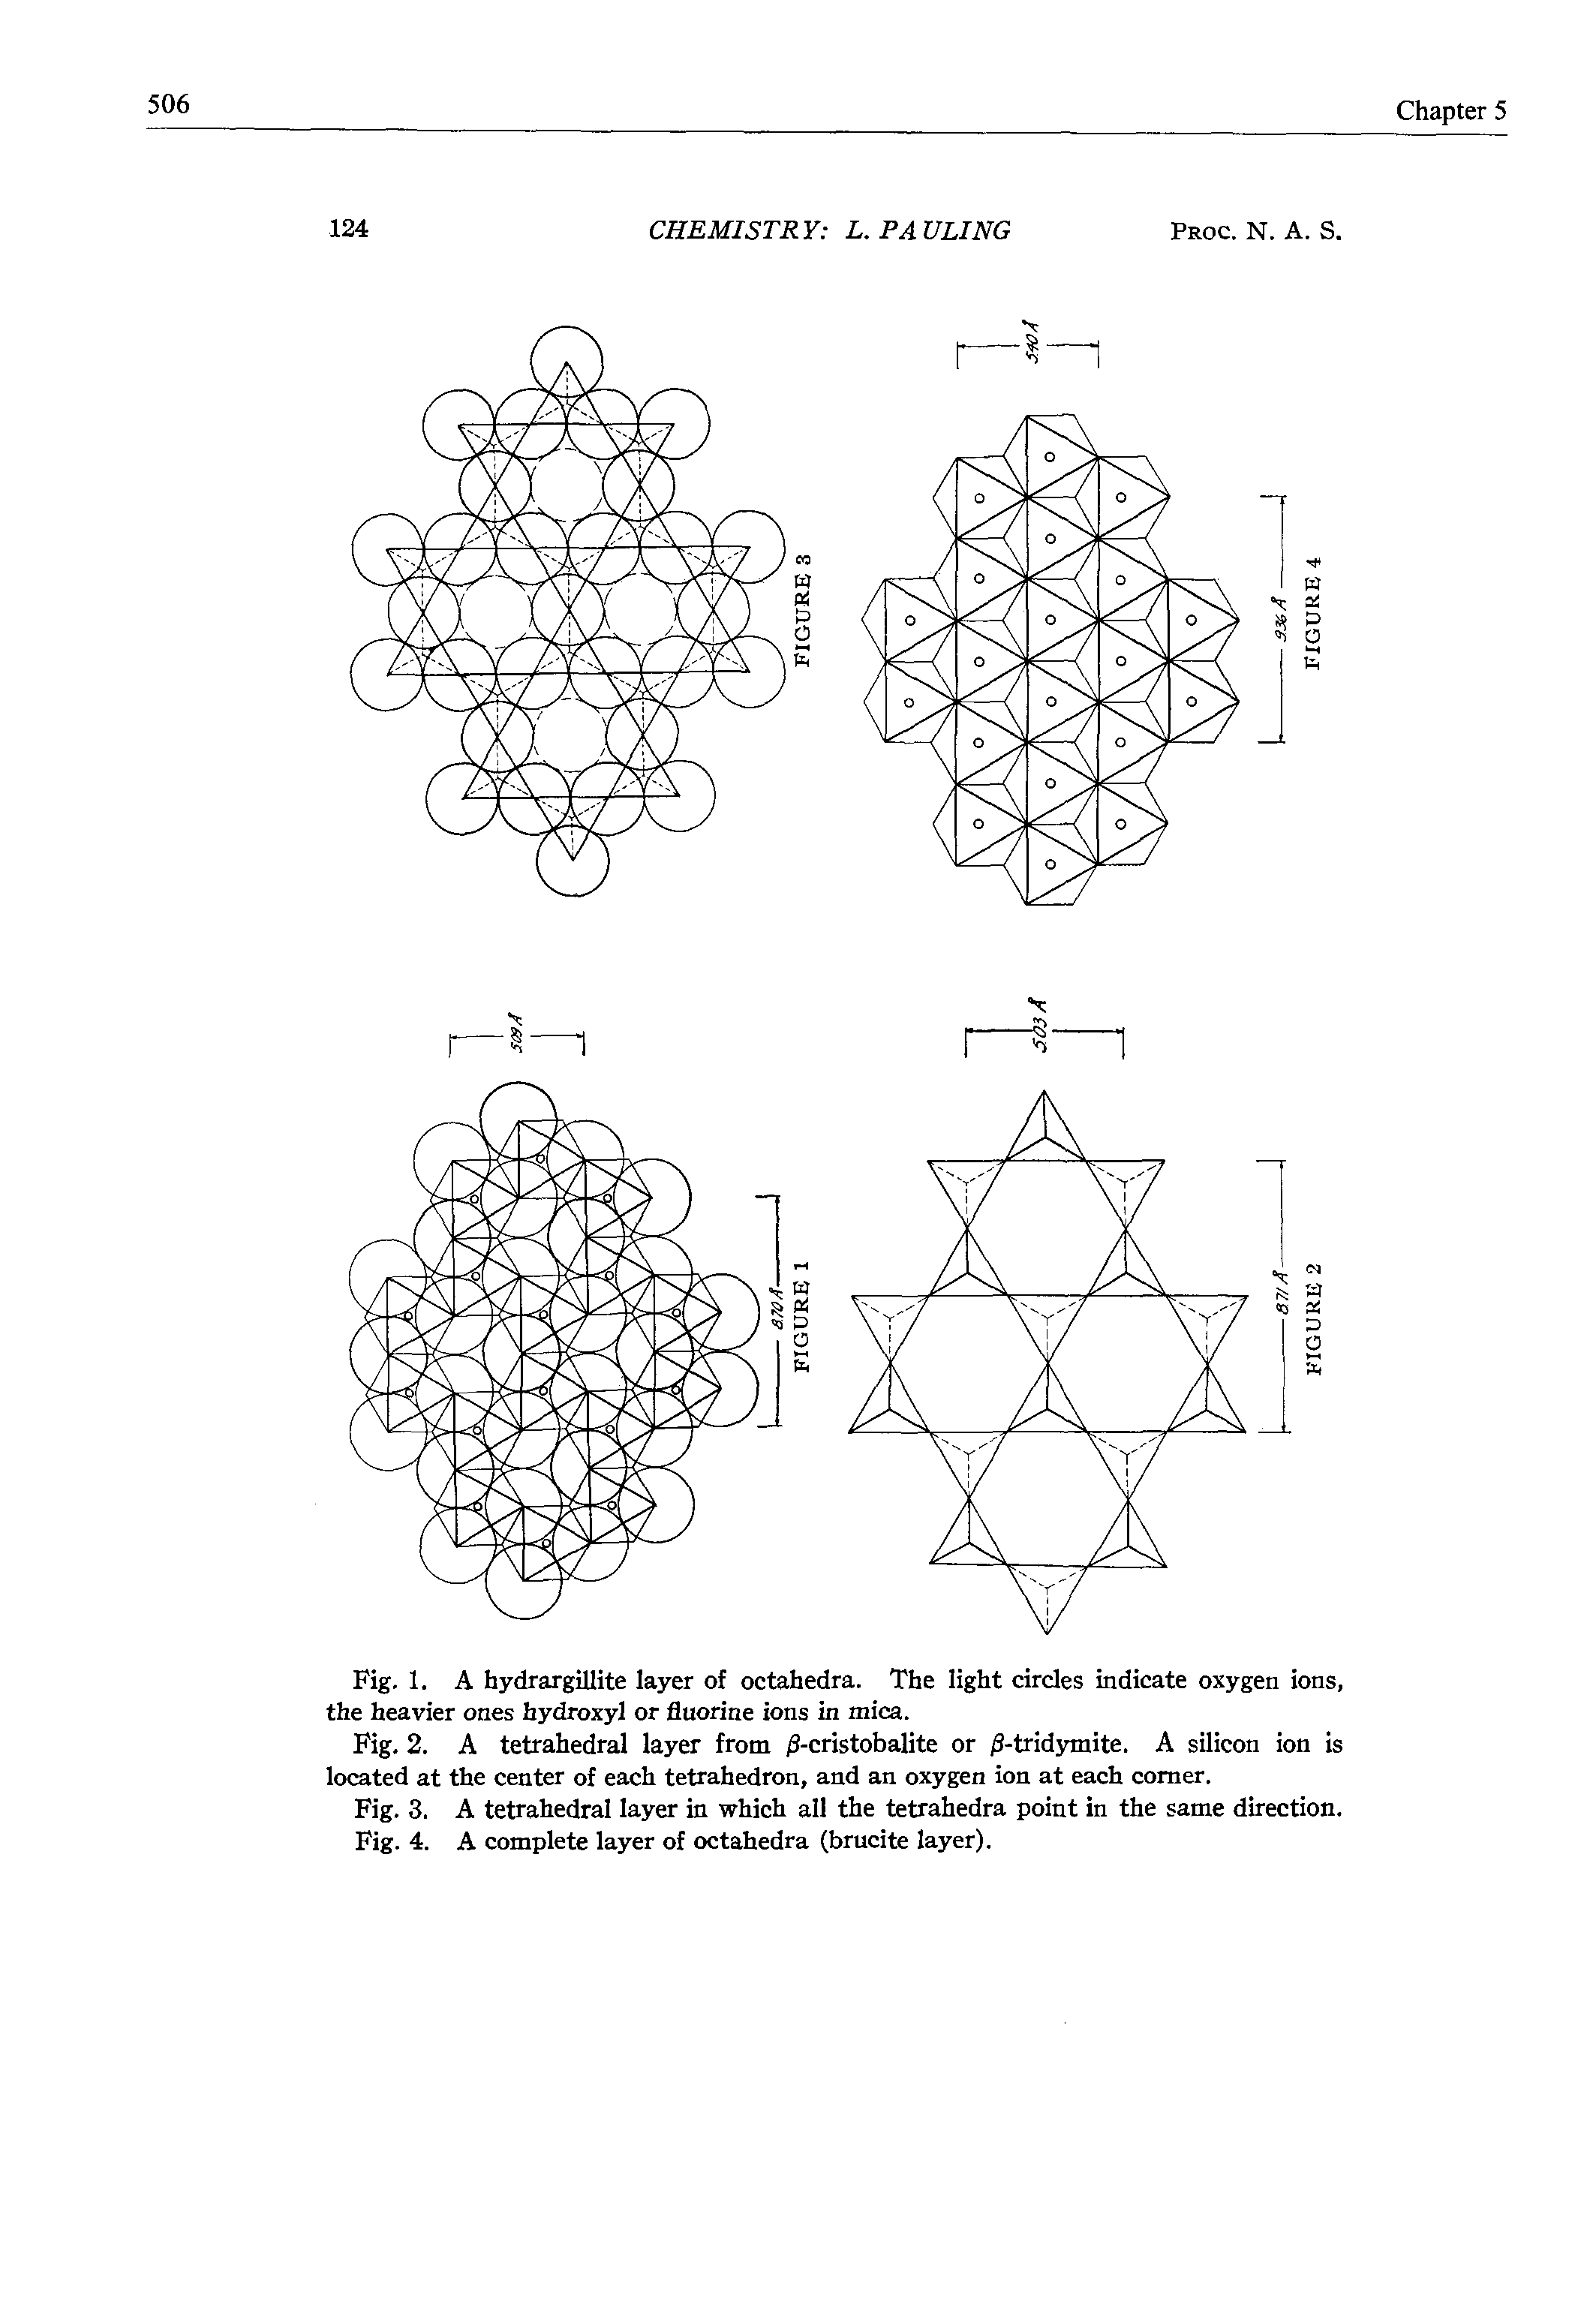 Fig. 3. A tetrahedral layer in which all the tetrahedra point in the same direction. Fig. 4. A complete layer of octahedra (brucite layer).